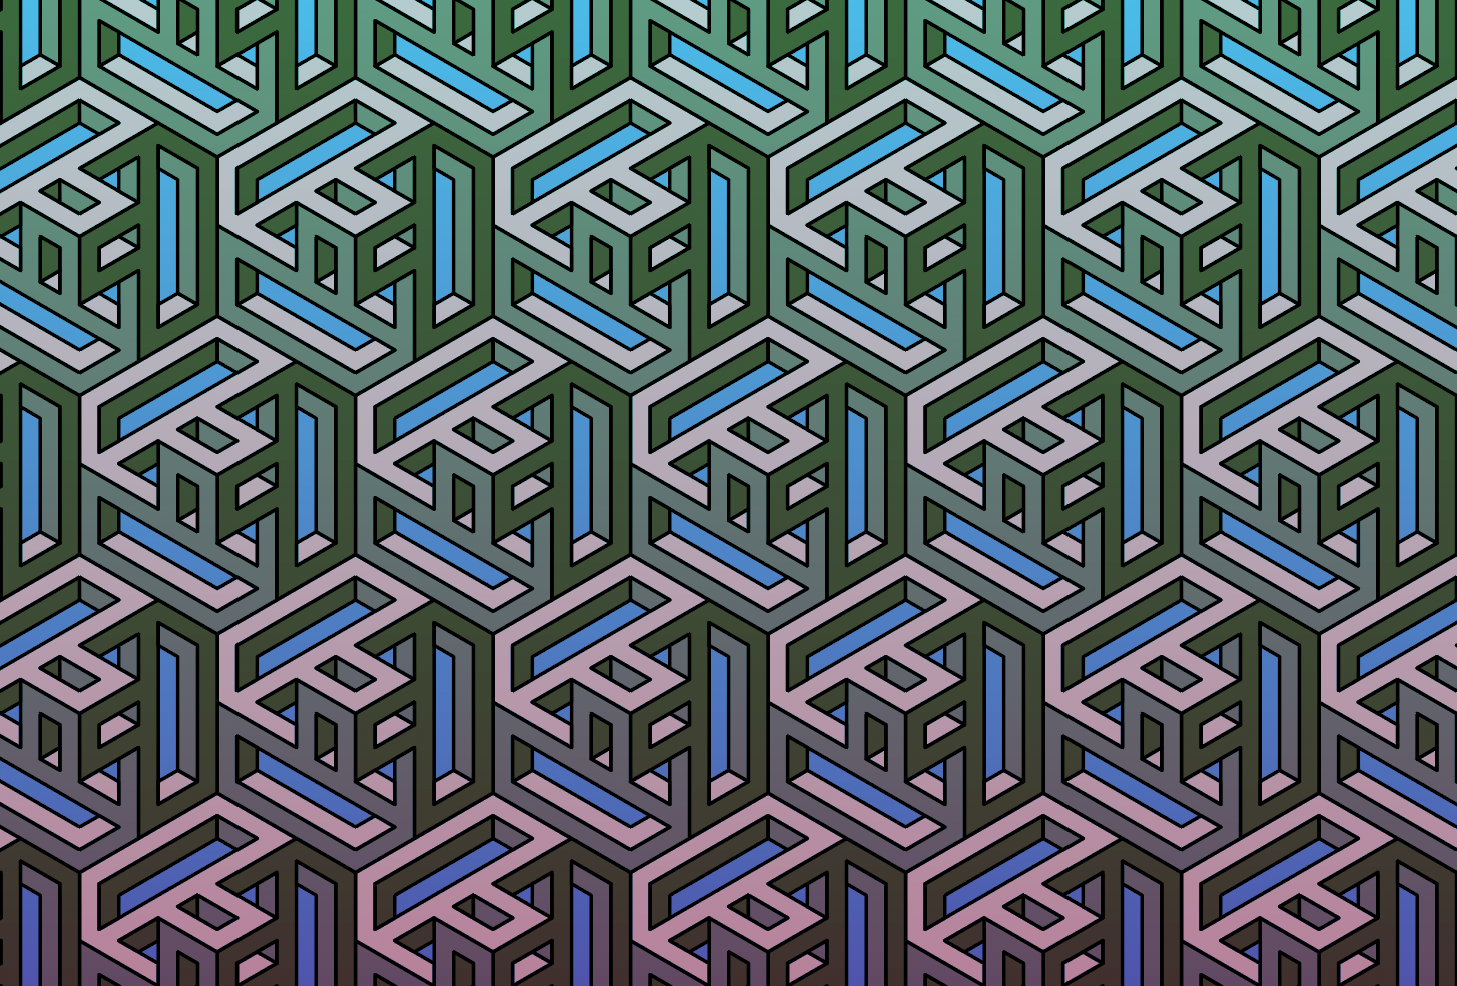 A pattern created from an impossible object in Adobe Illustrator